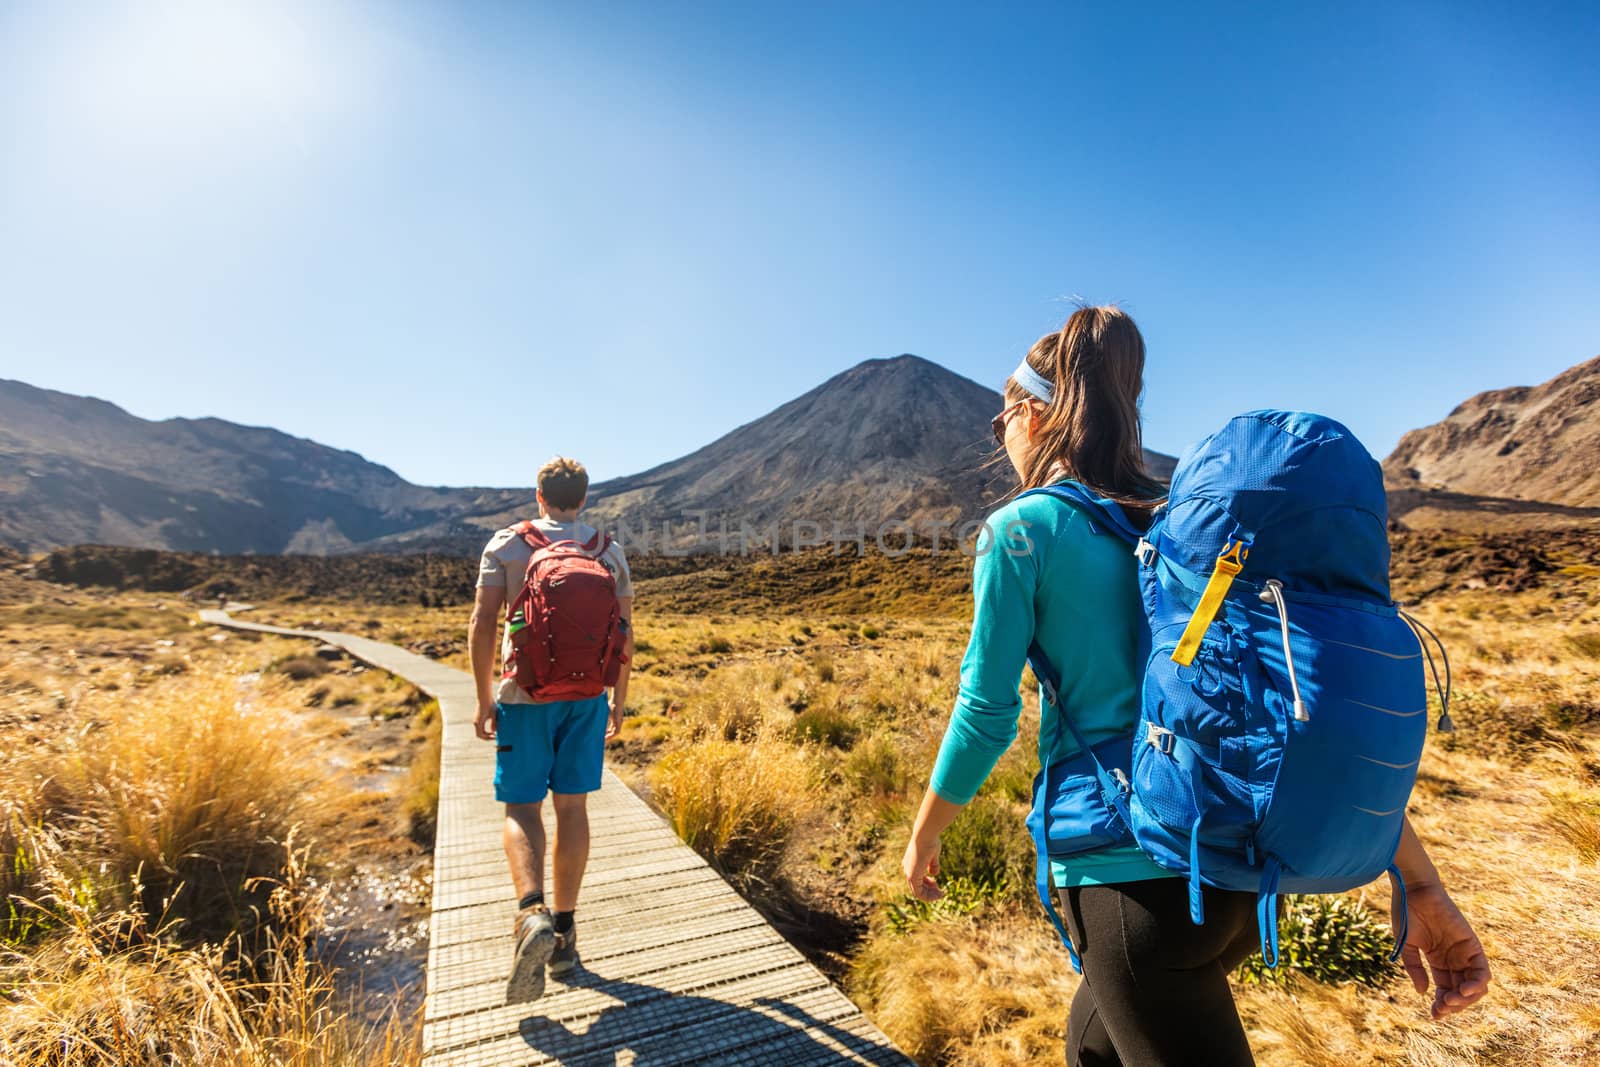 New Zealand Hiking Couple Backpackers Tramping At Tongariro National Park. Male and female hikers hiking by Mount Ngauruhoe. People living healthy active lifestyle outdoors by Maridav